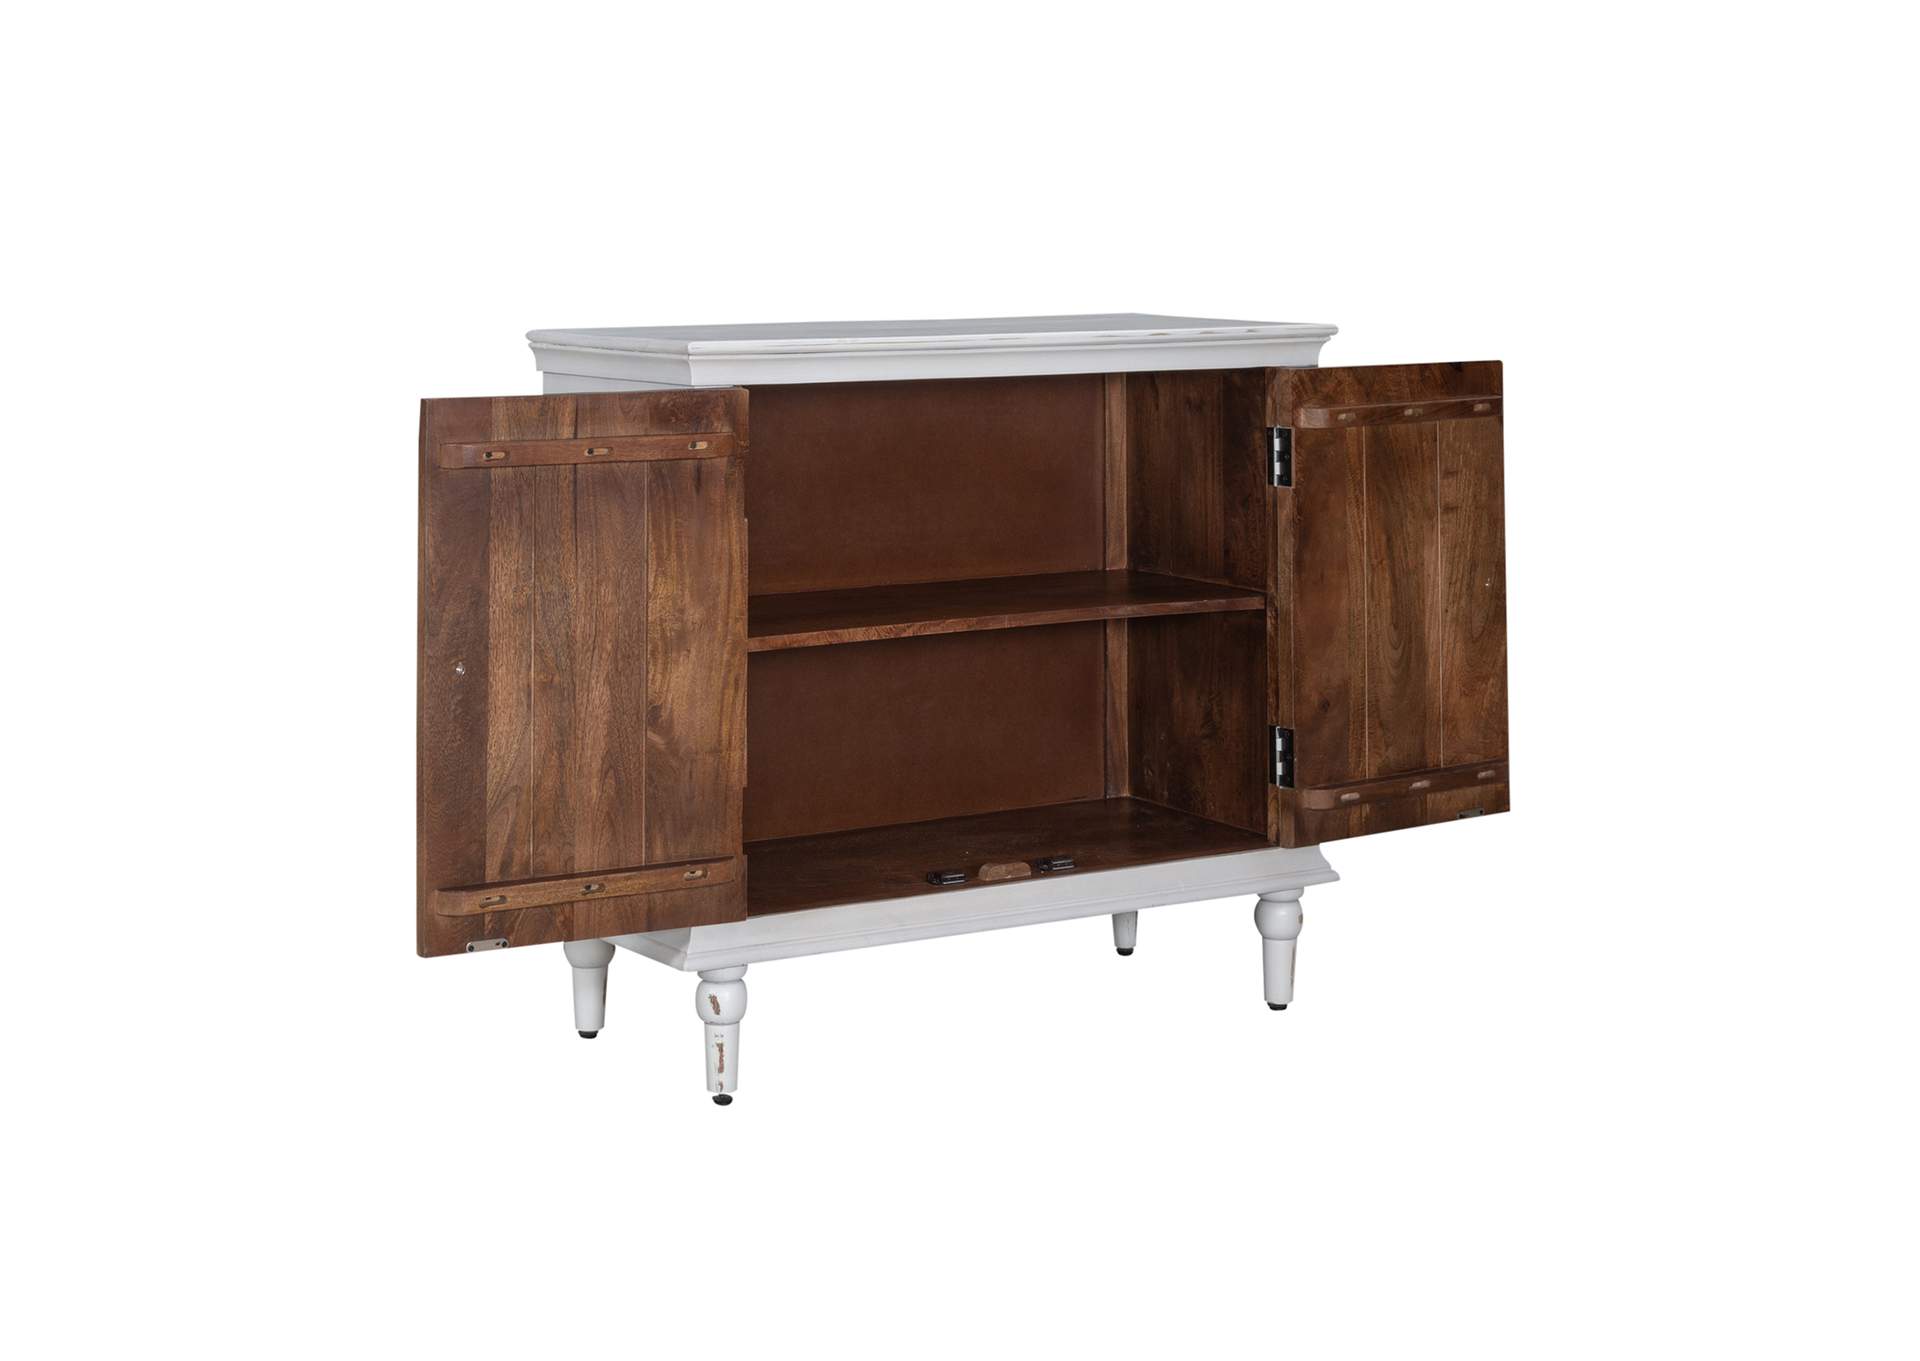 French Quarter 2 Door Accent Cabinet,Liberty